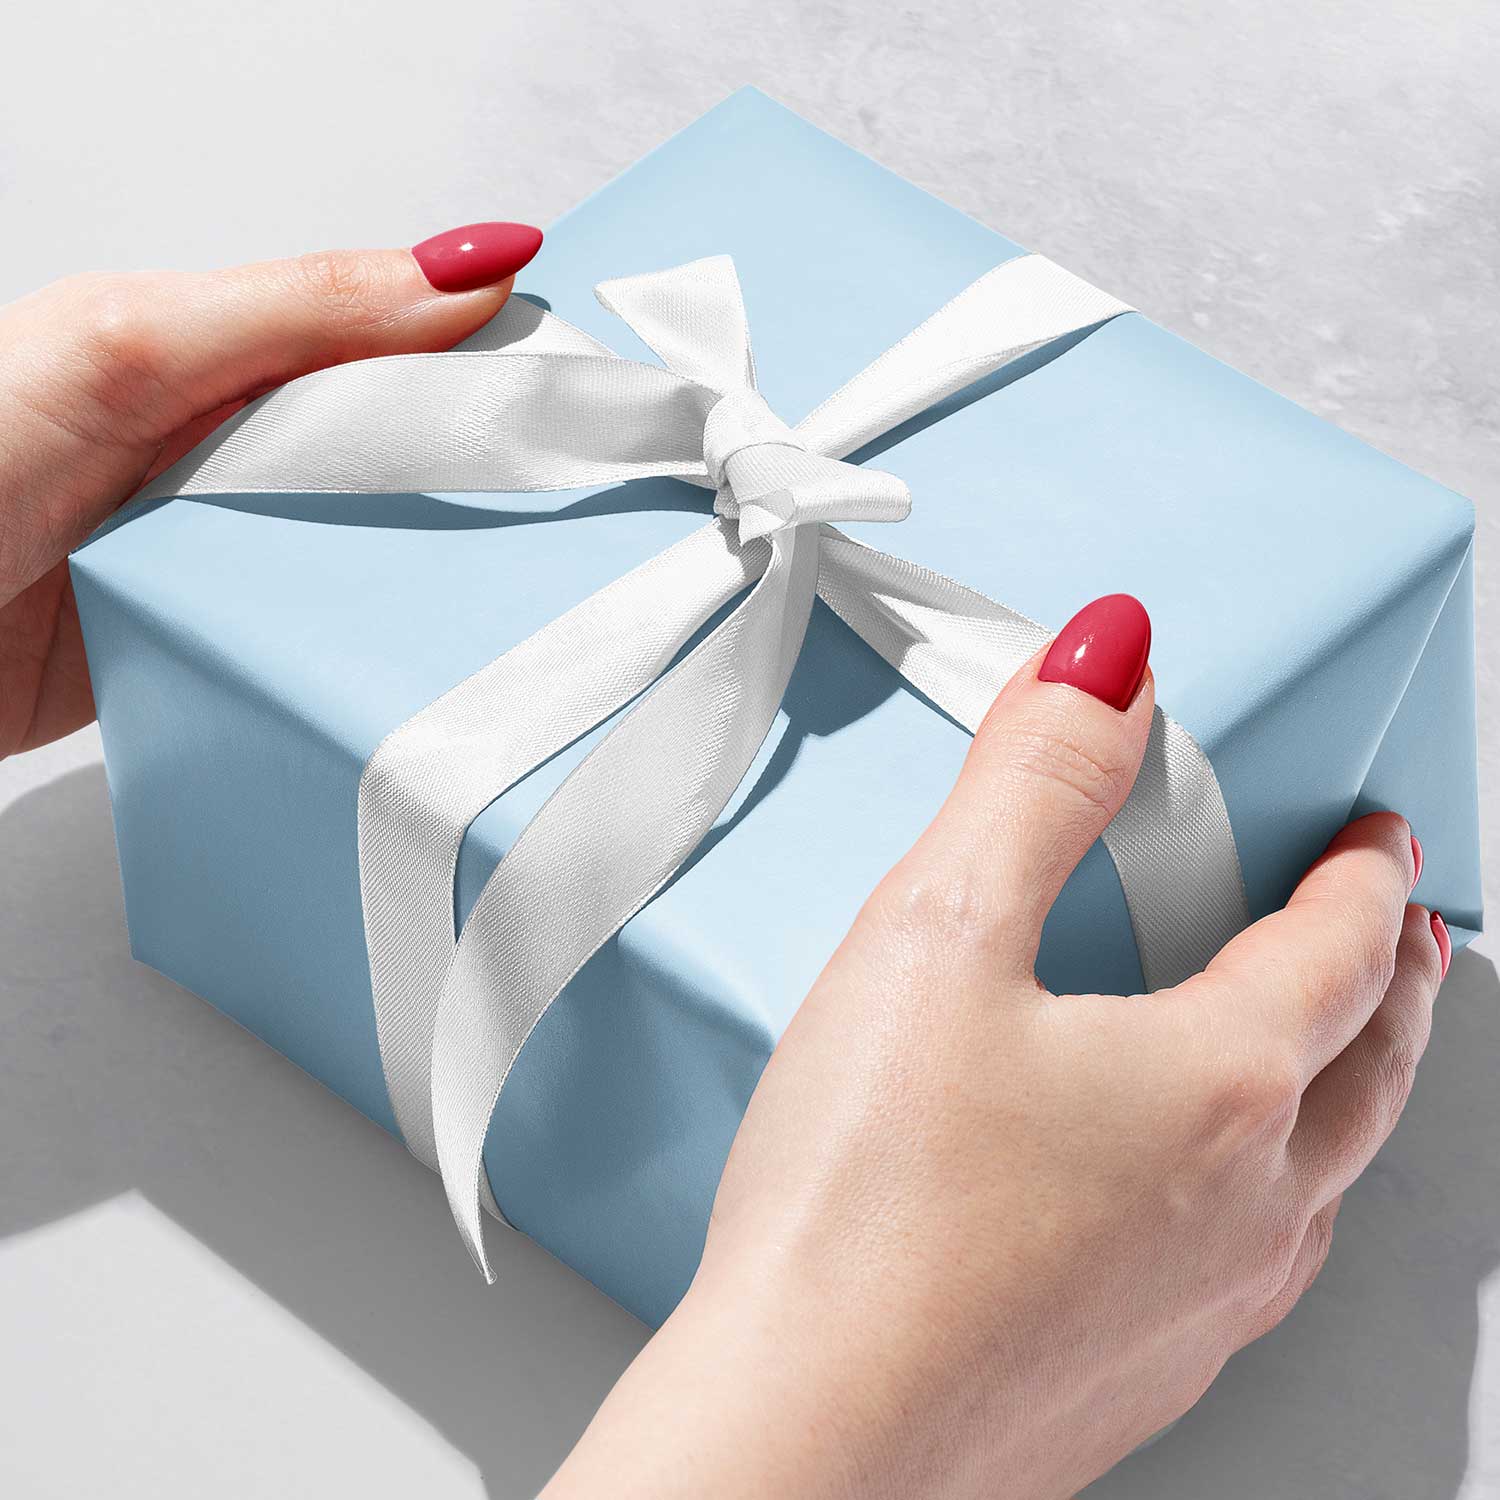 Gift wrapping presents on dark blue table. Stock Photo by ©amarosy 91746514